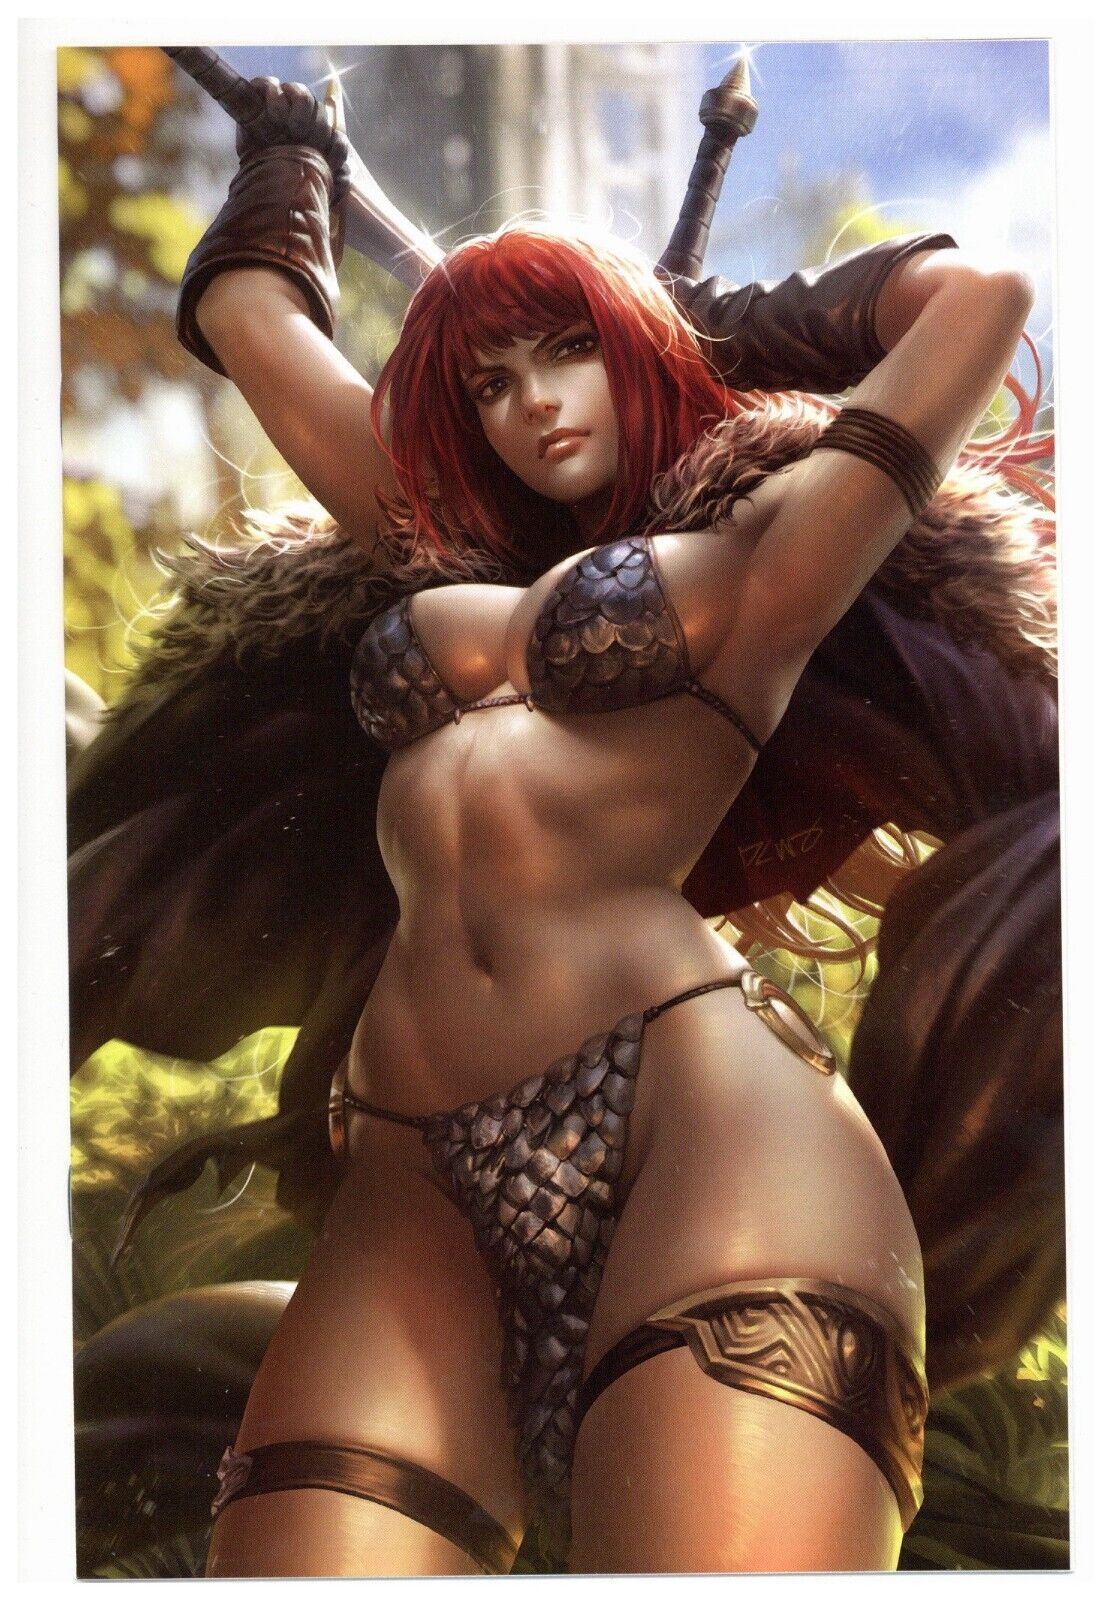 Rare Red Sonja #1 - Derrick Chew Virgin Variant - NM+ or better - Rare and HTF